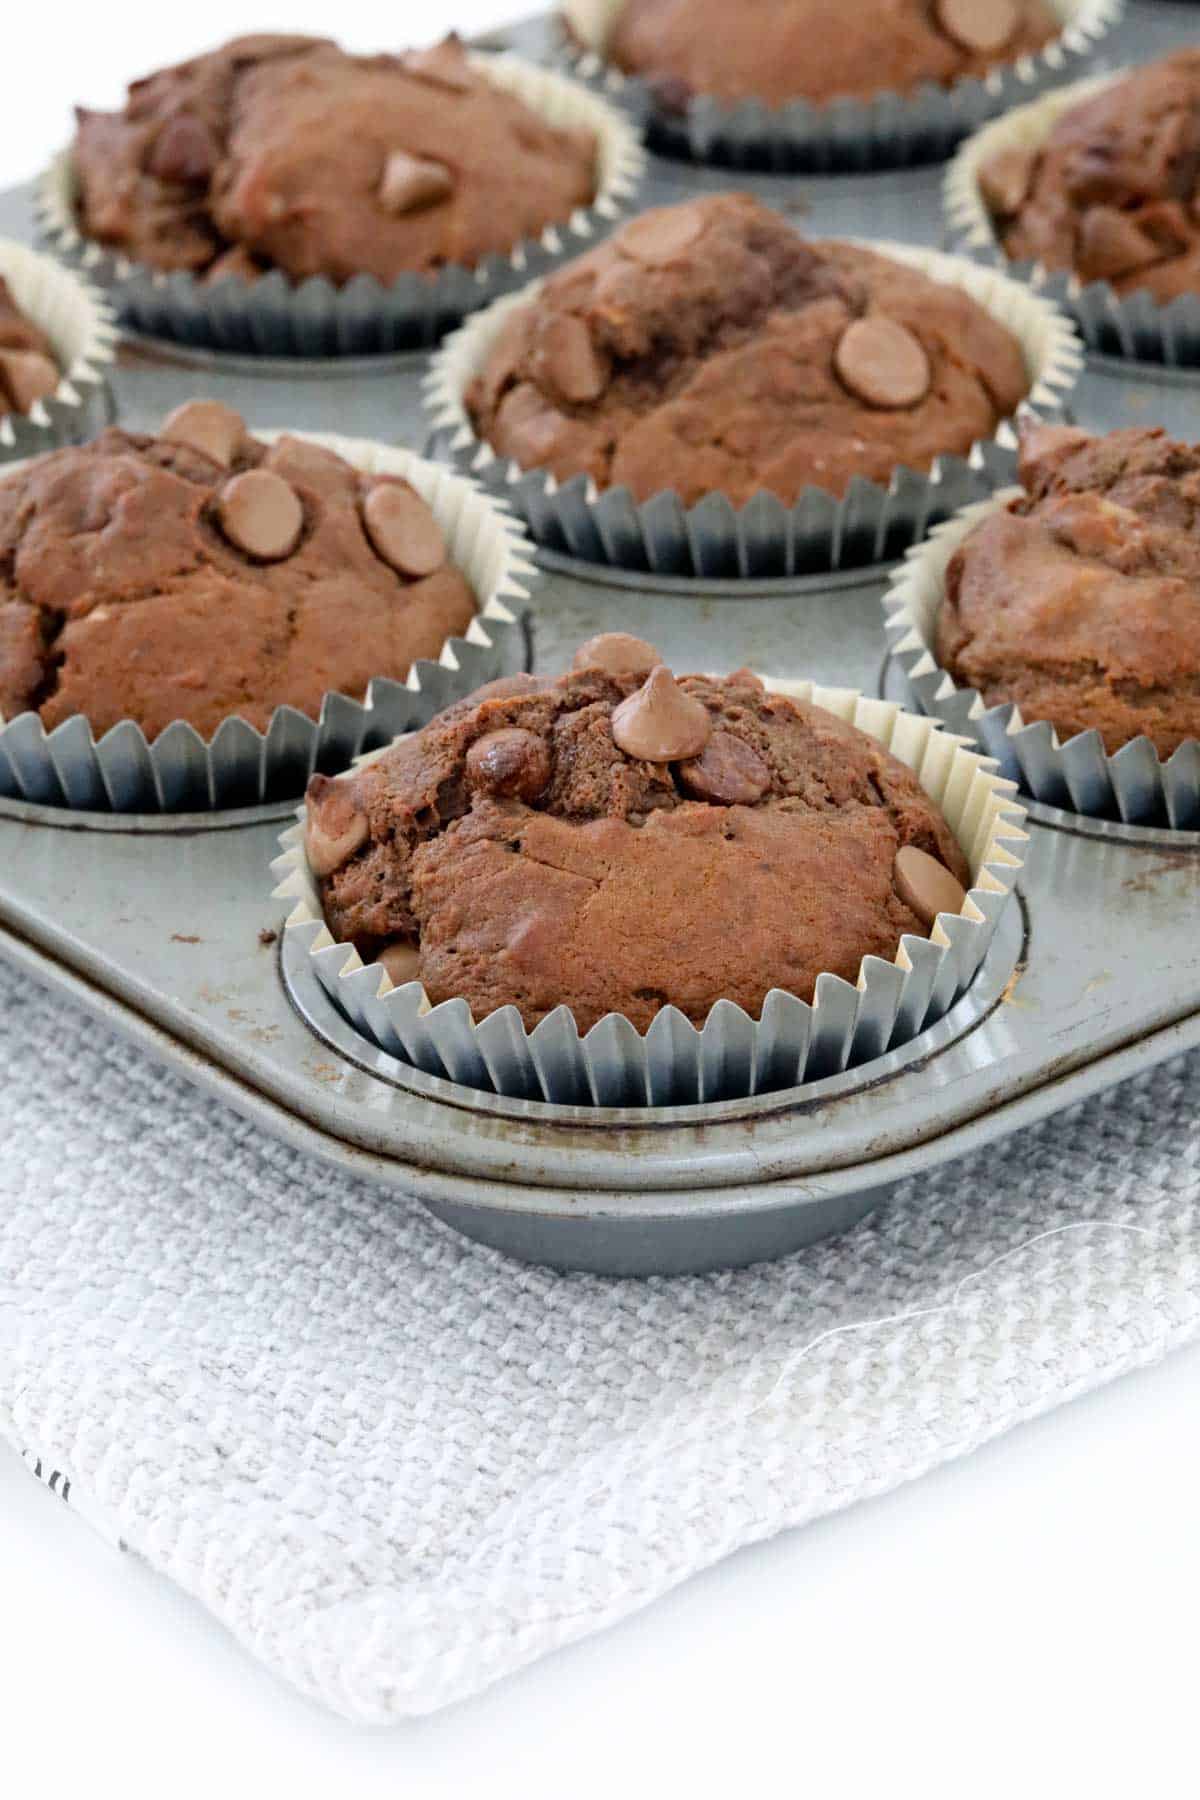 A muffin tray filled with chocolate banana muffins in silver cases.